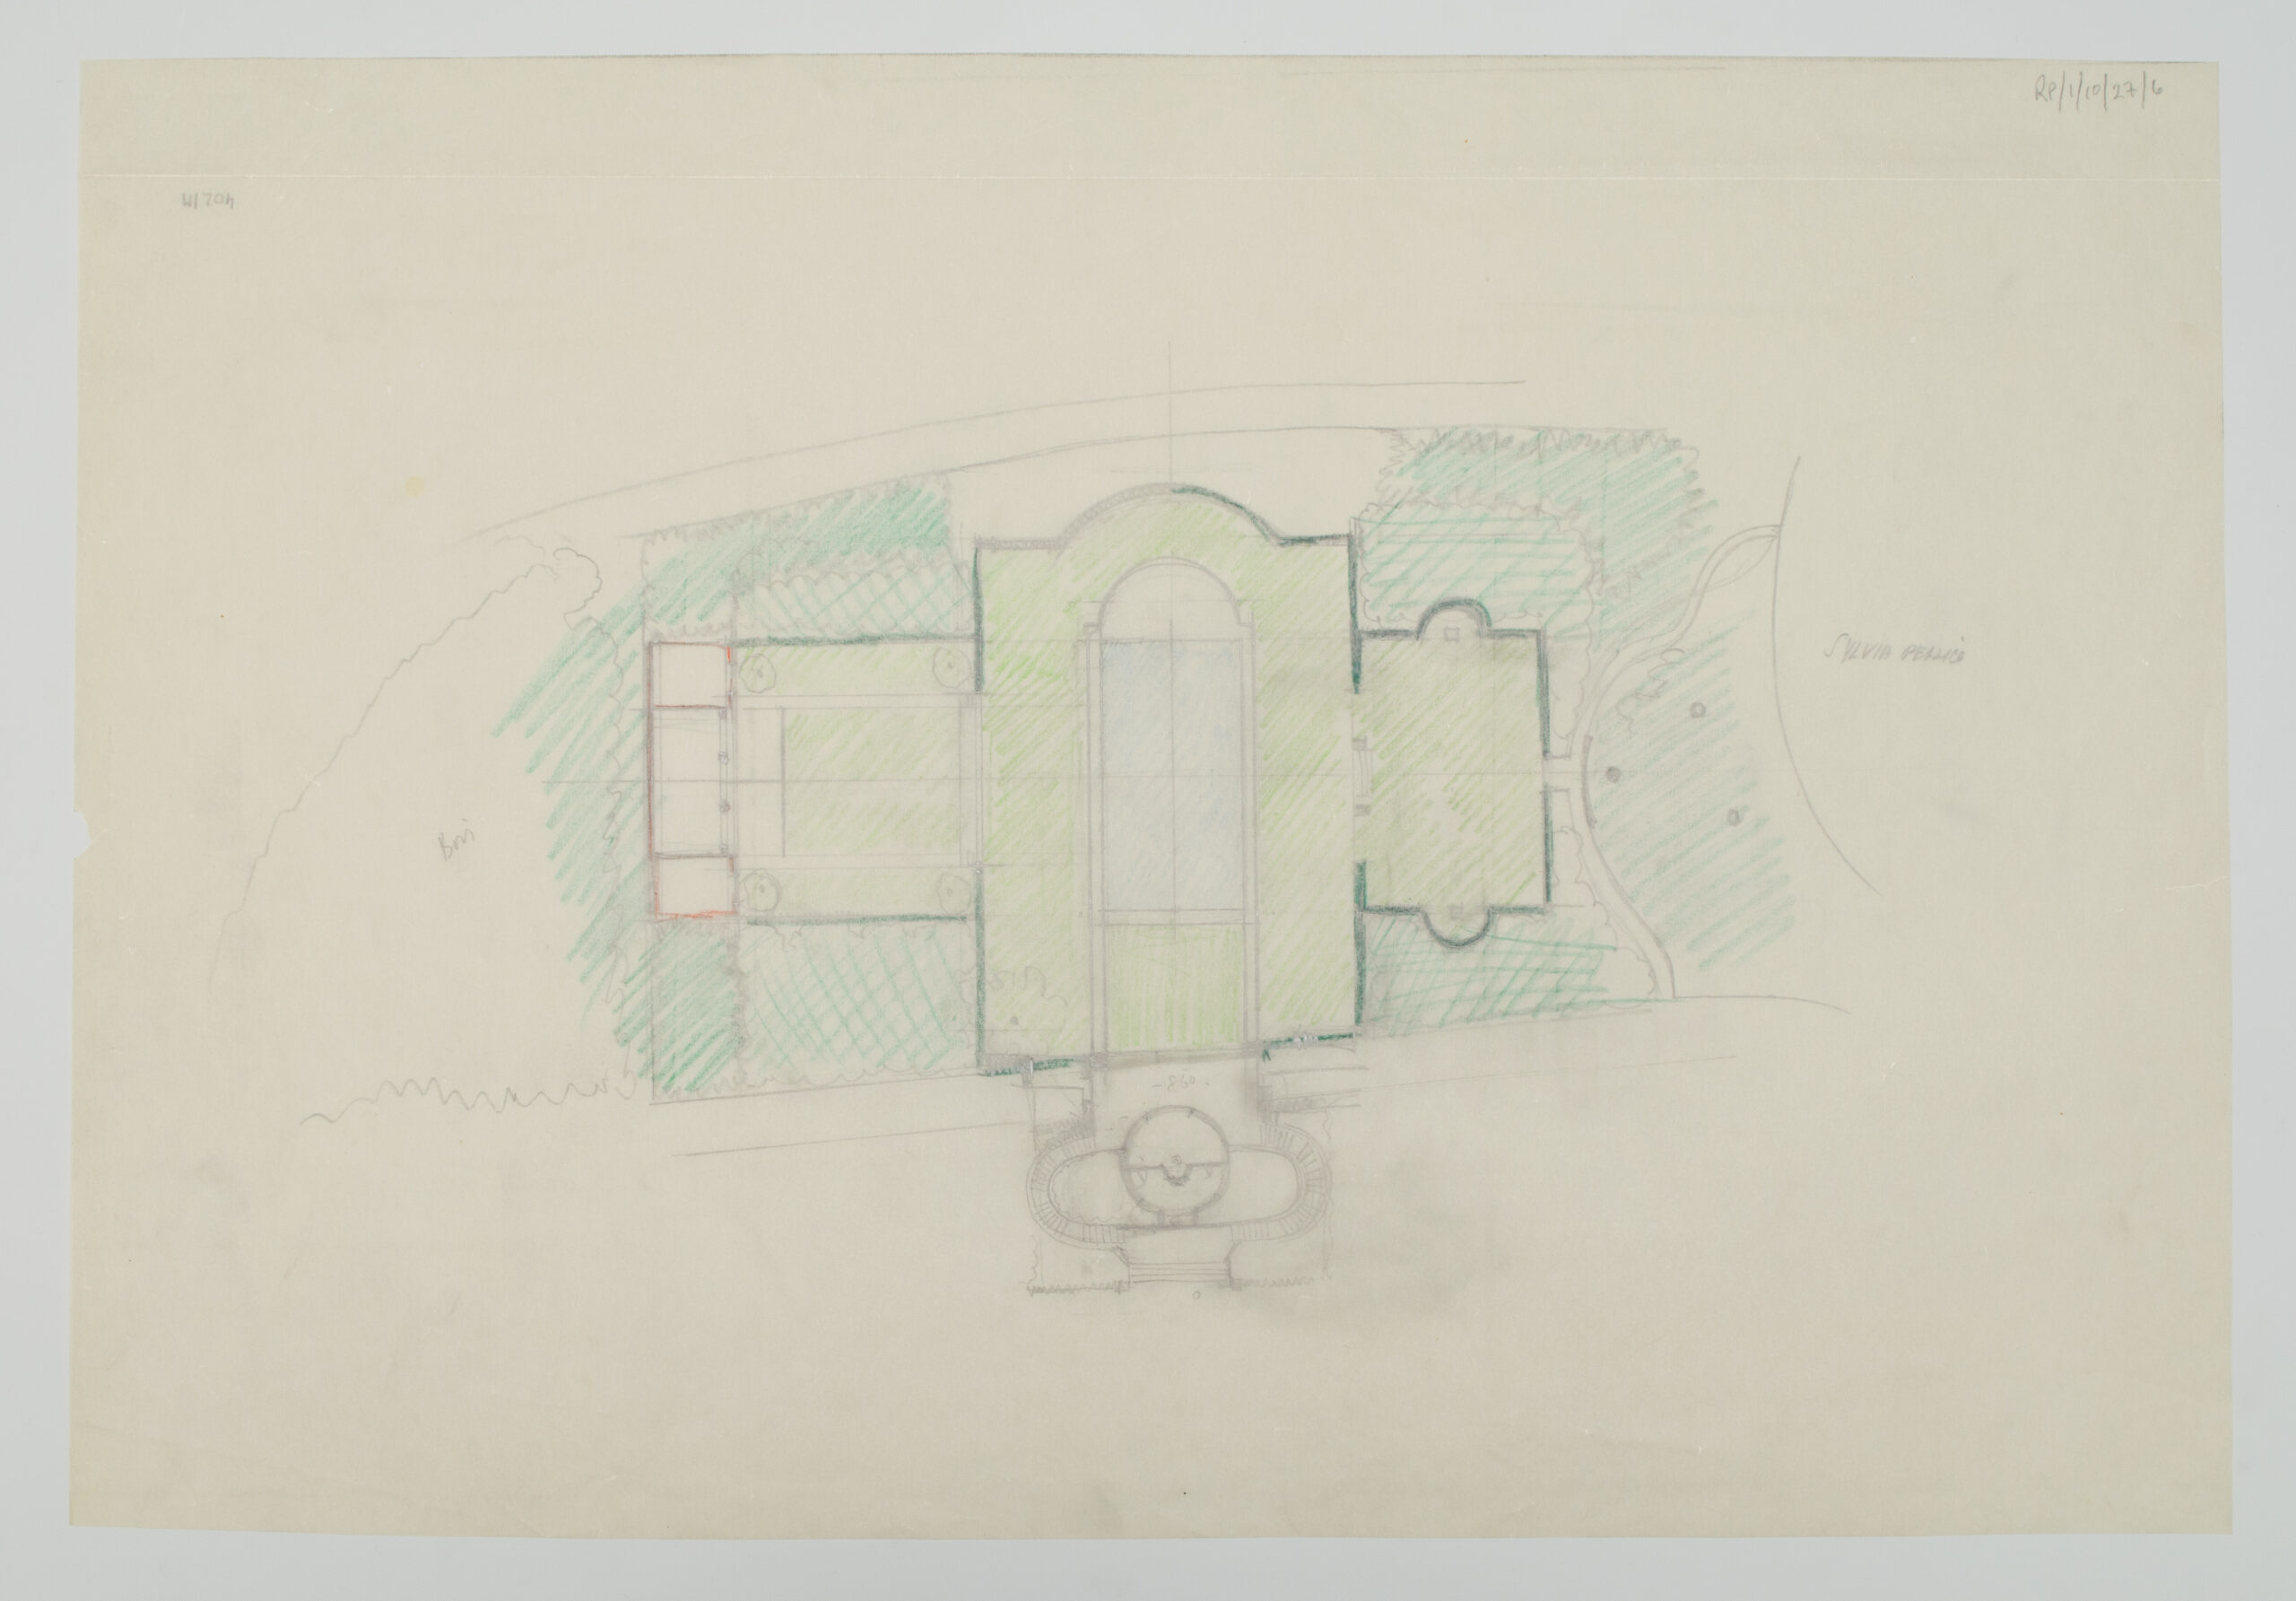 Russell Page, Design for the Garden of Villa Silvio Pellico (c. 1957; pencil and colored pencil on paper, 445 x 650 mm; London, RHS Lindley Library)